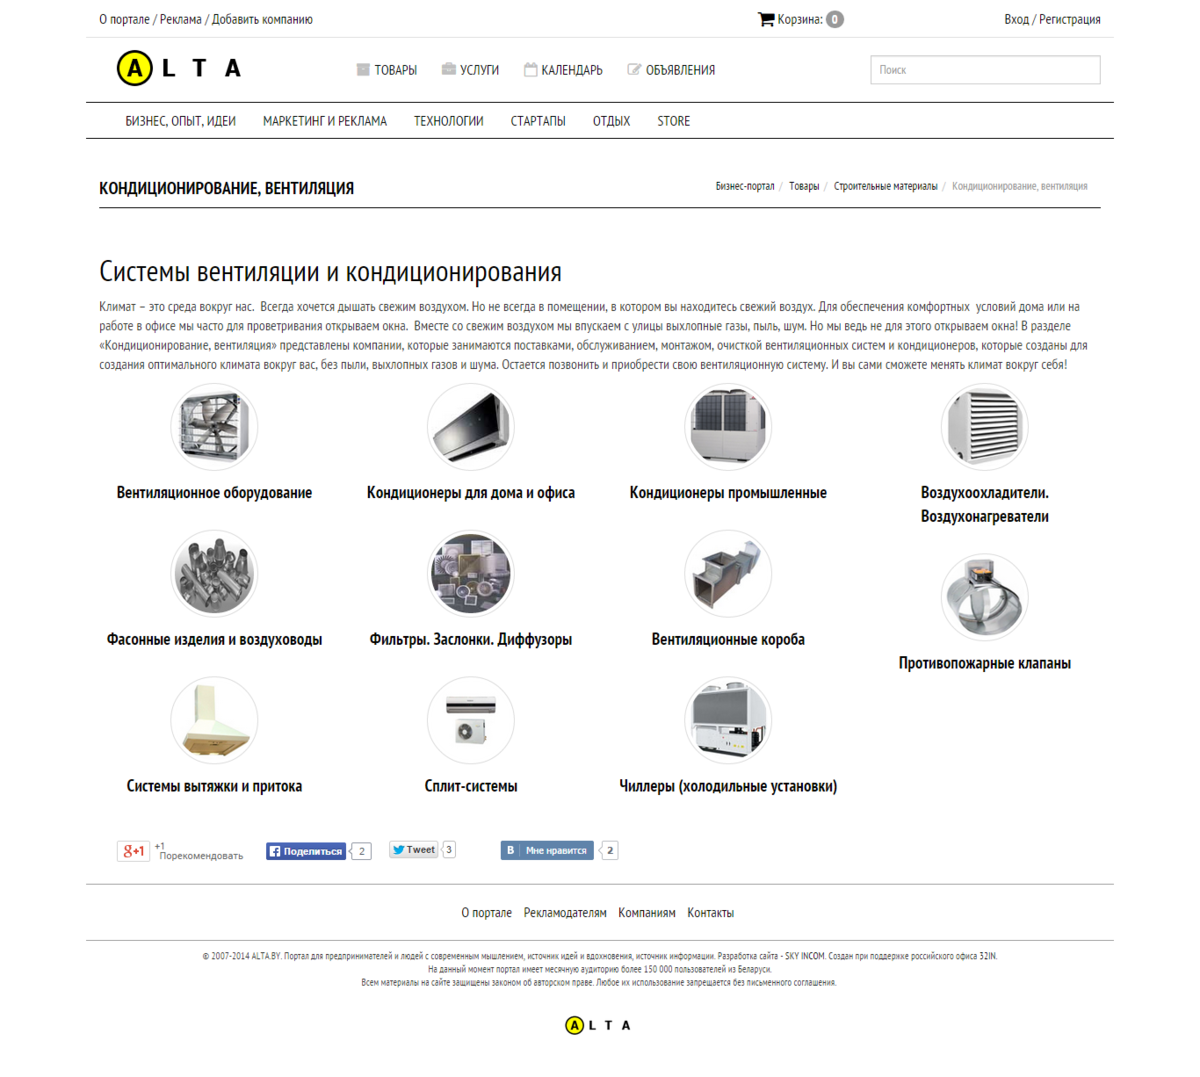 Business portal ALTA.BY